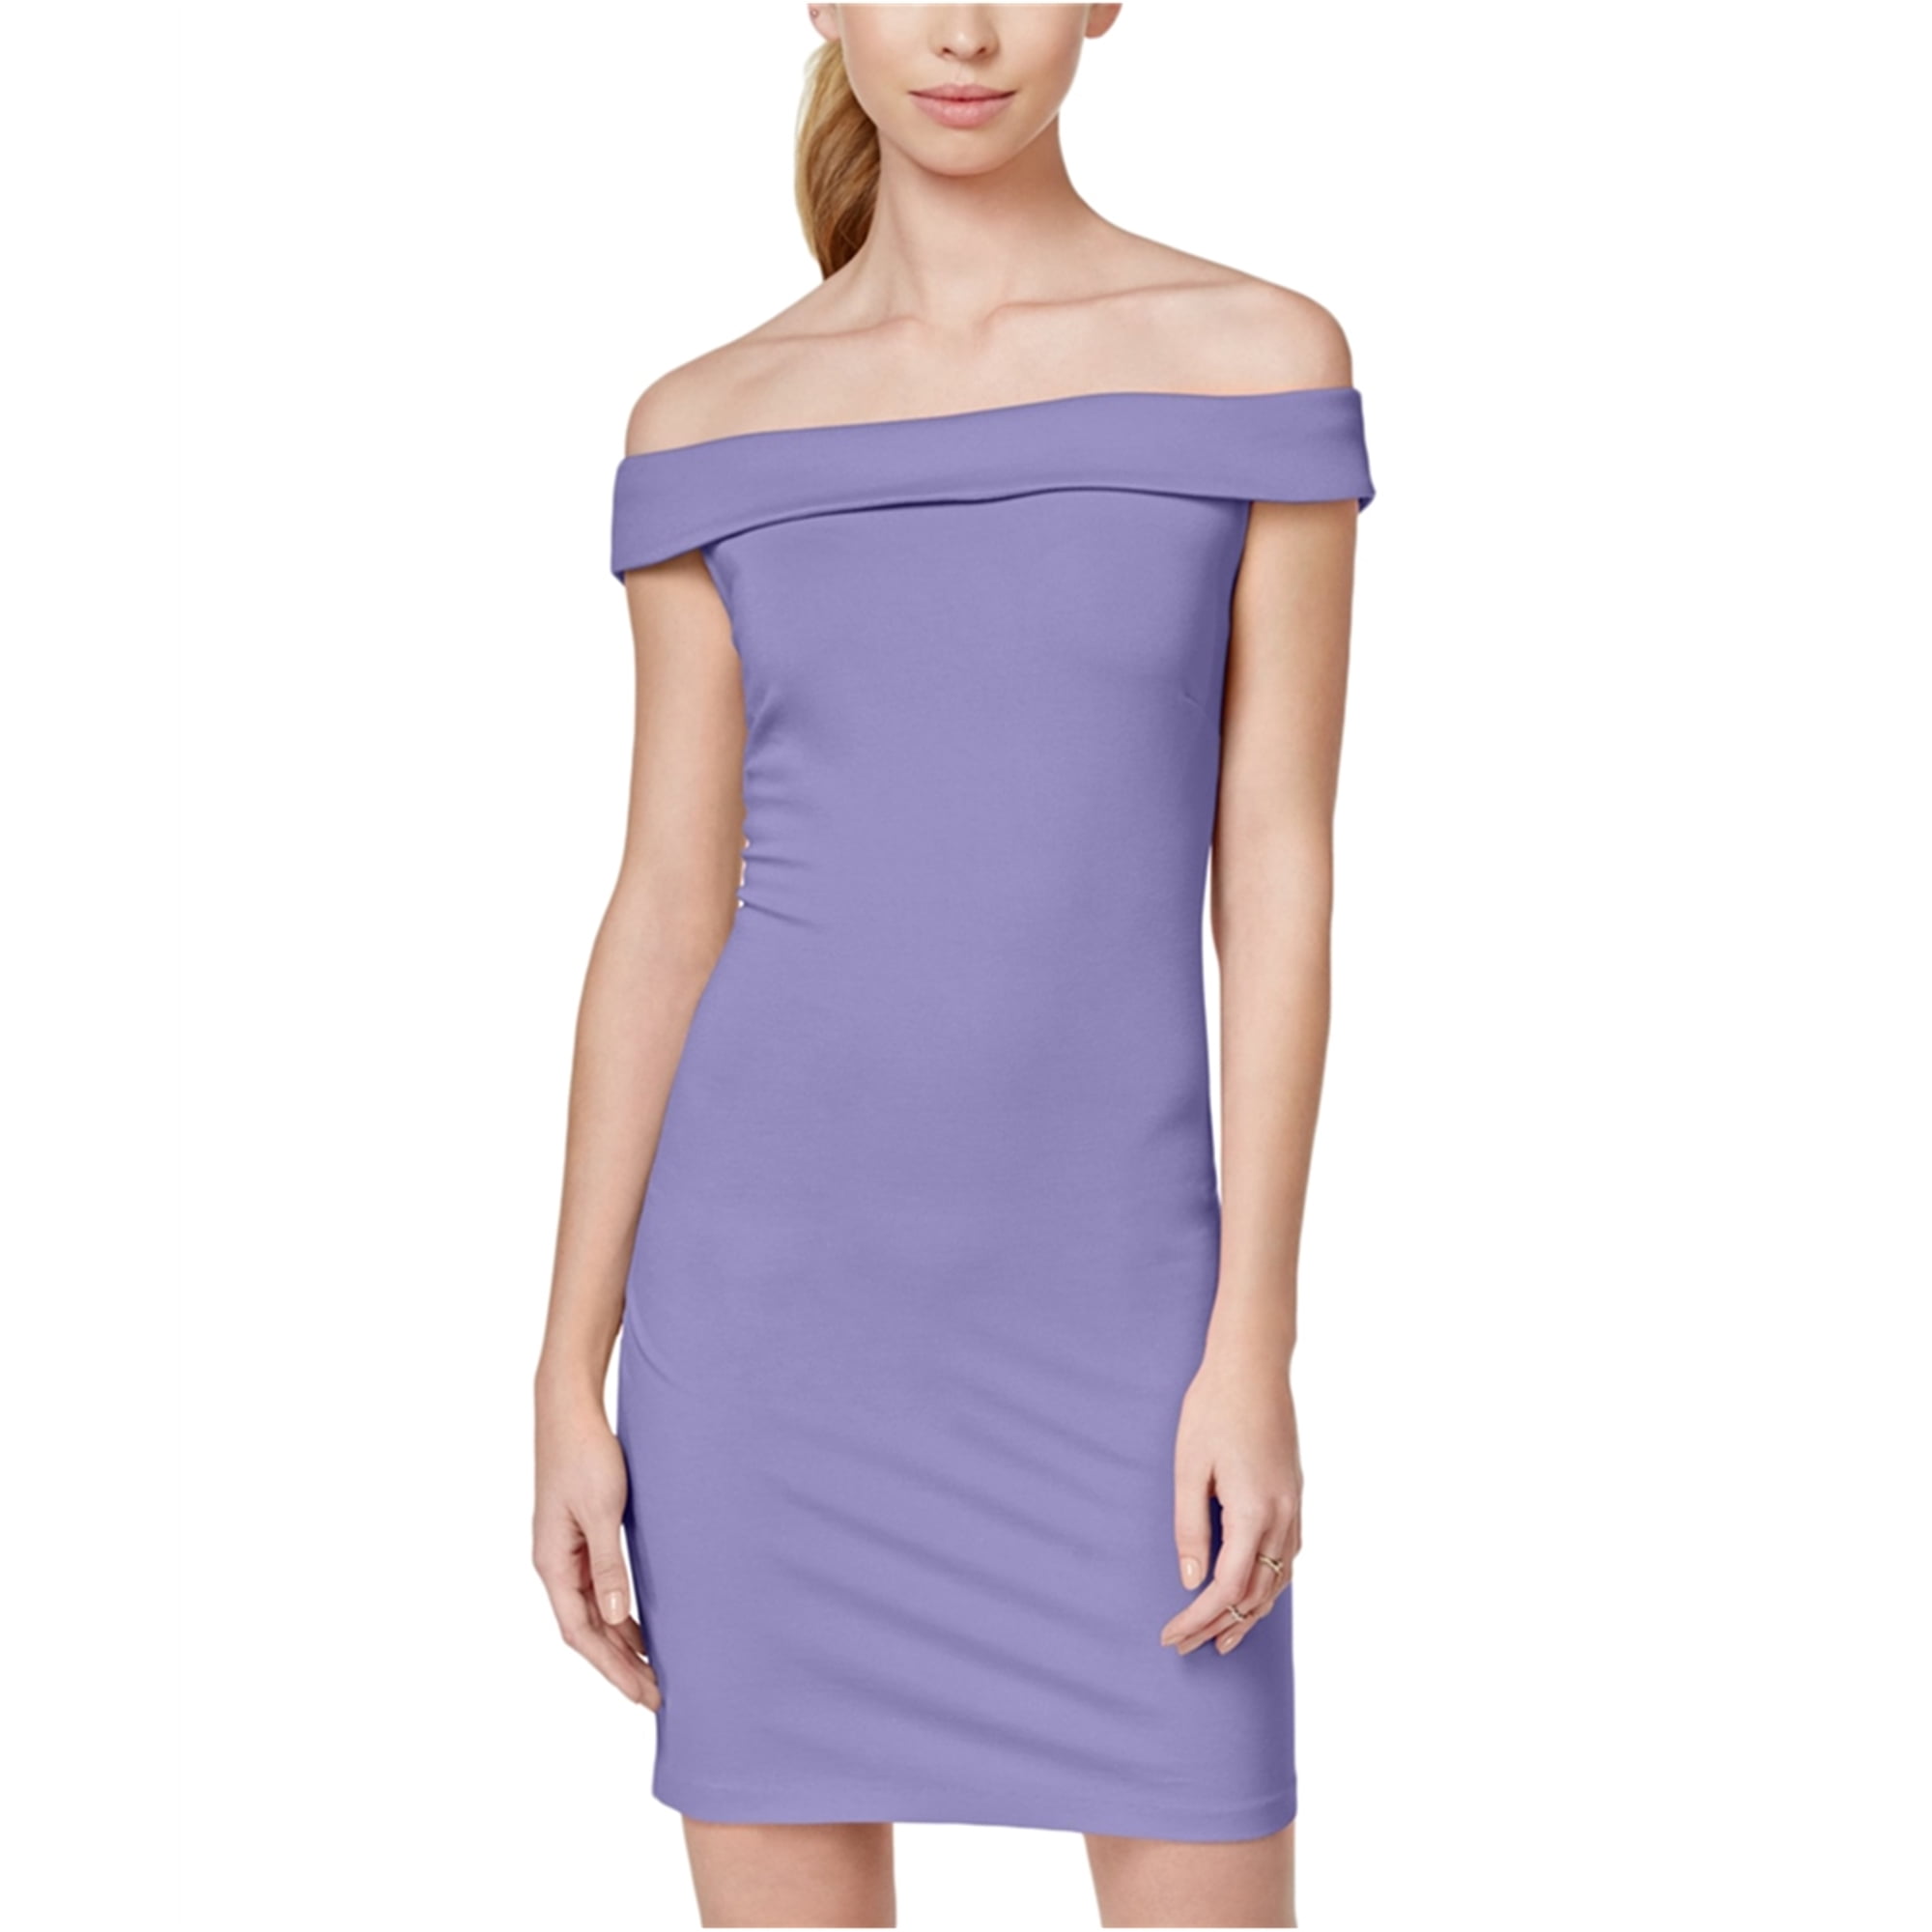 Awe　You　Bodycon　Purple,　Womens　Ponte　Knit　Dress,　Small　In　Of